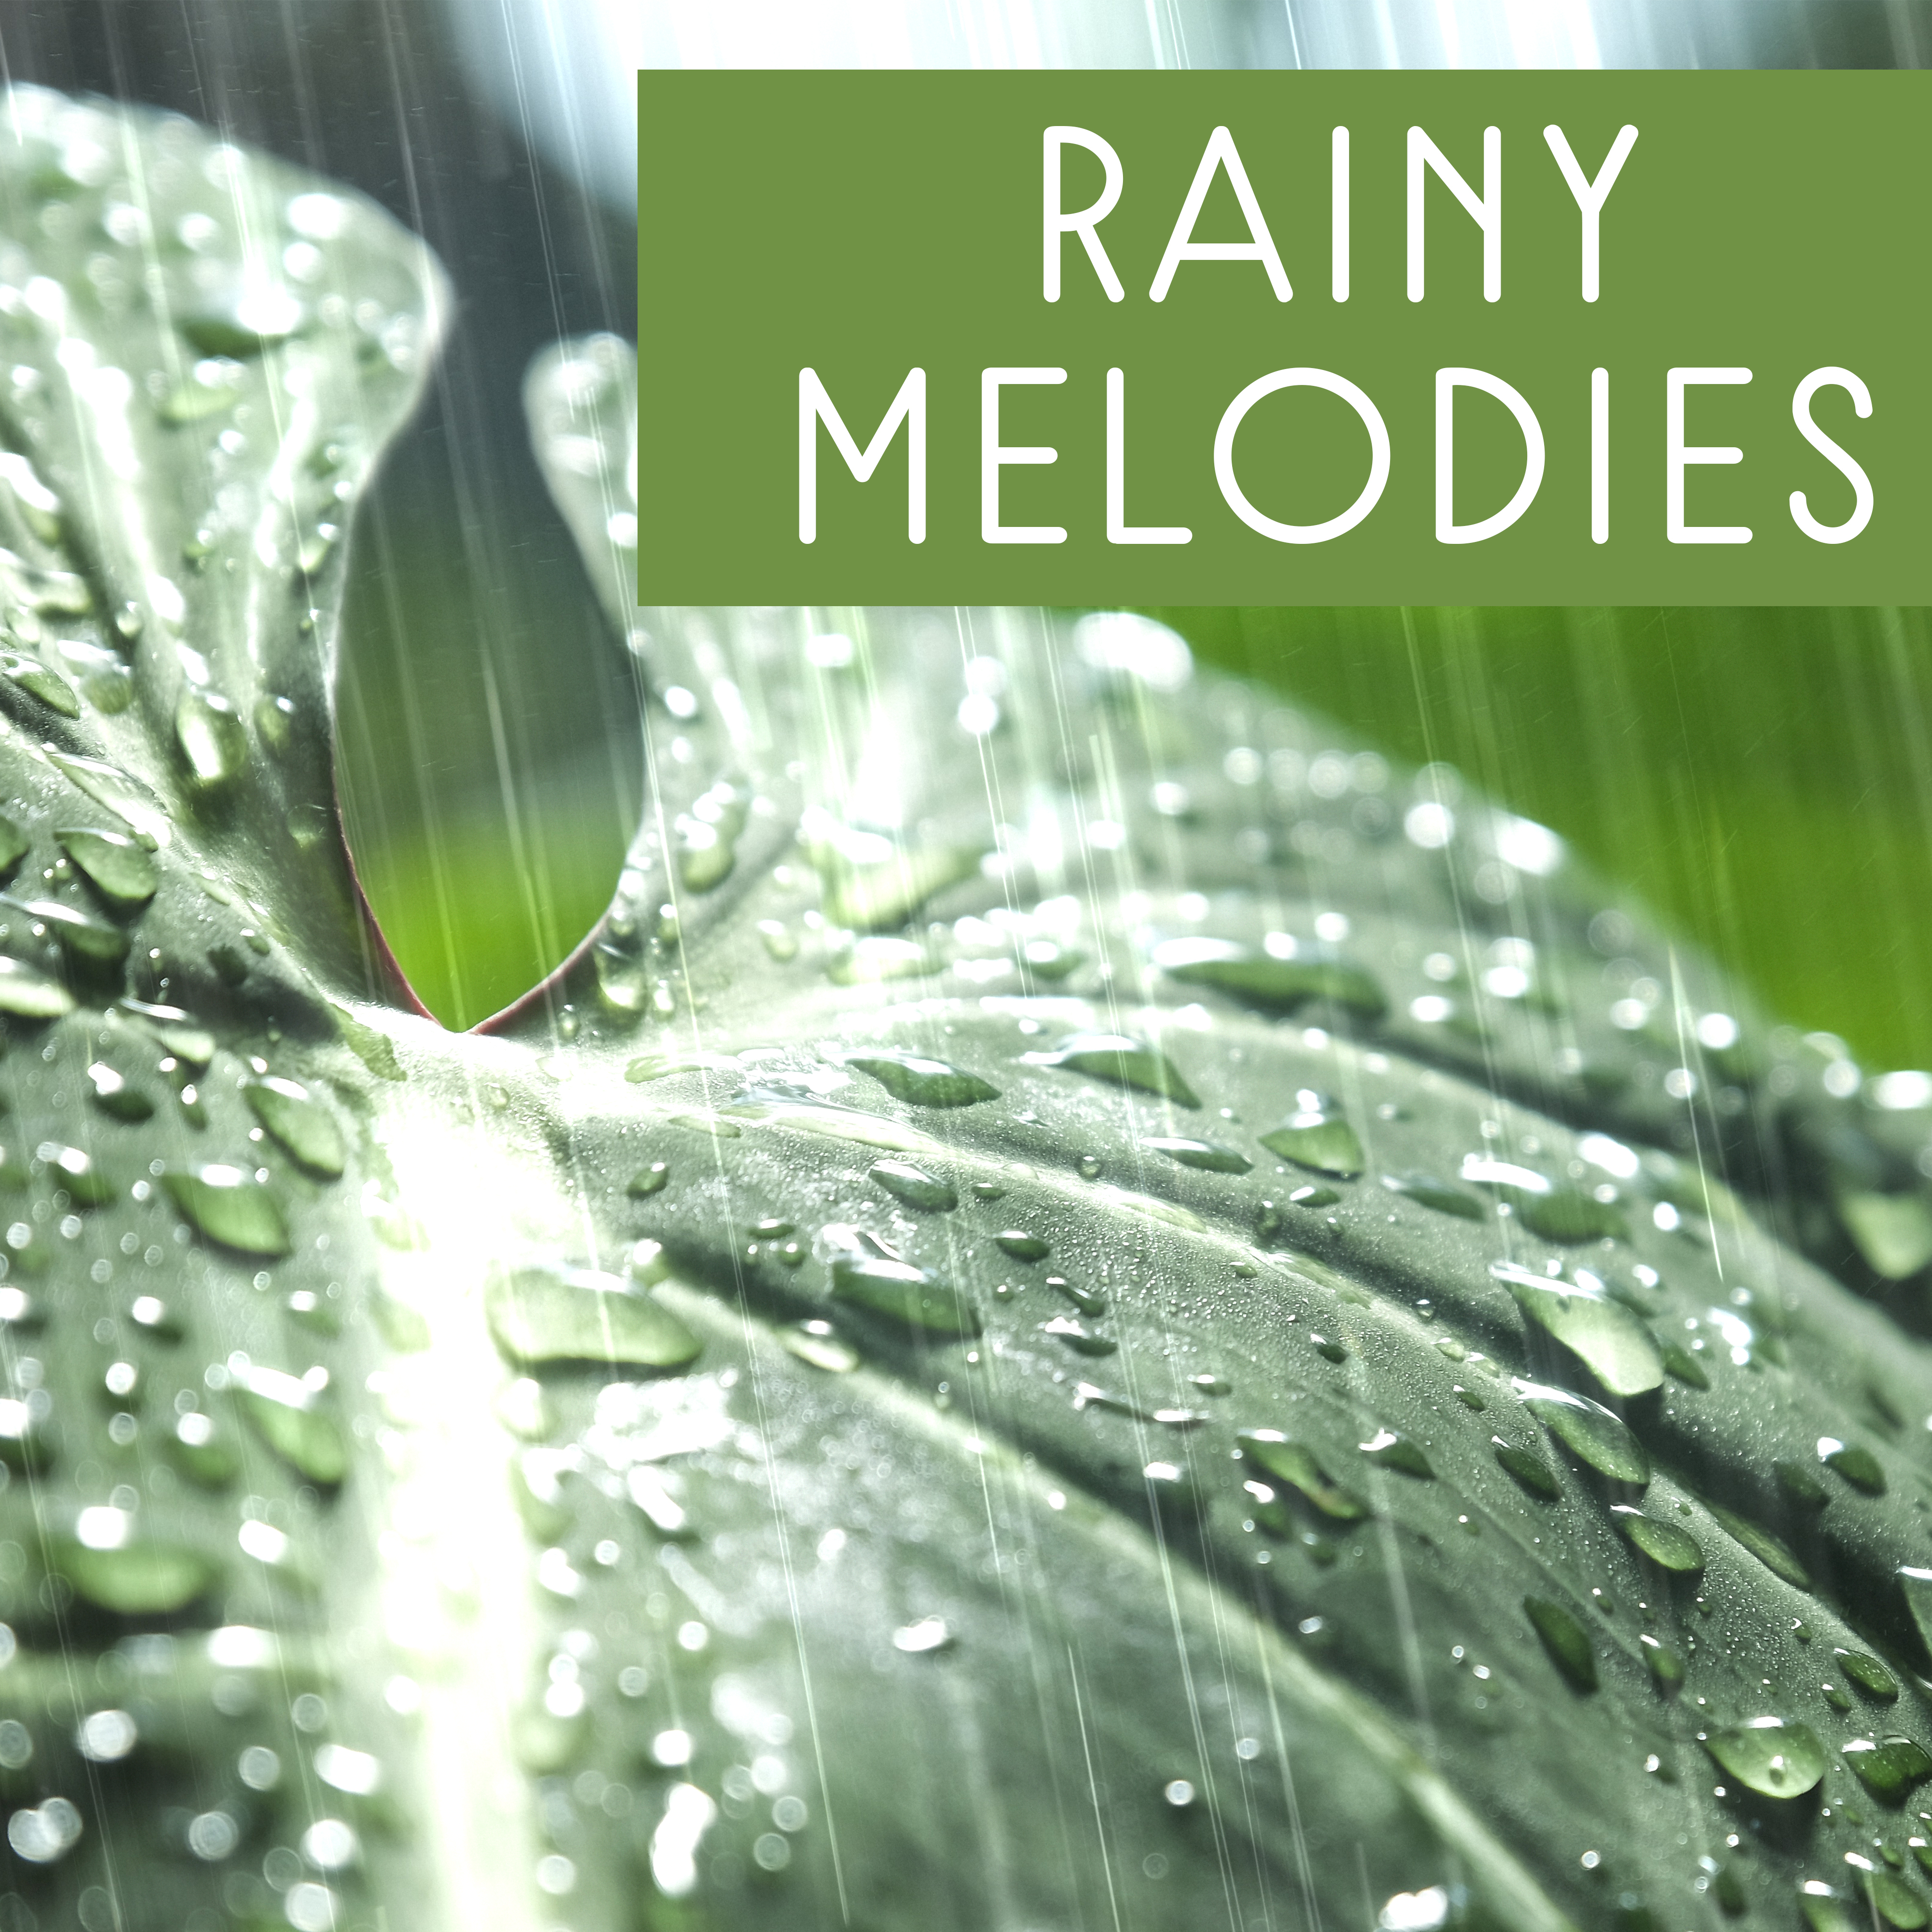 Rainy Melodies  Sounds of Nature, Rainy Songs, Good Mood, New Age, Relaxing Music